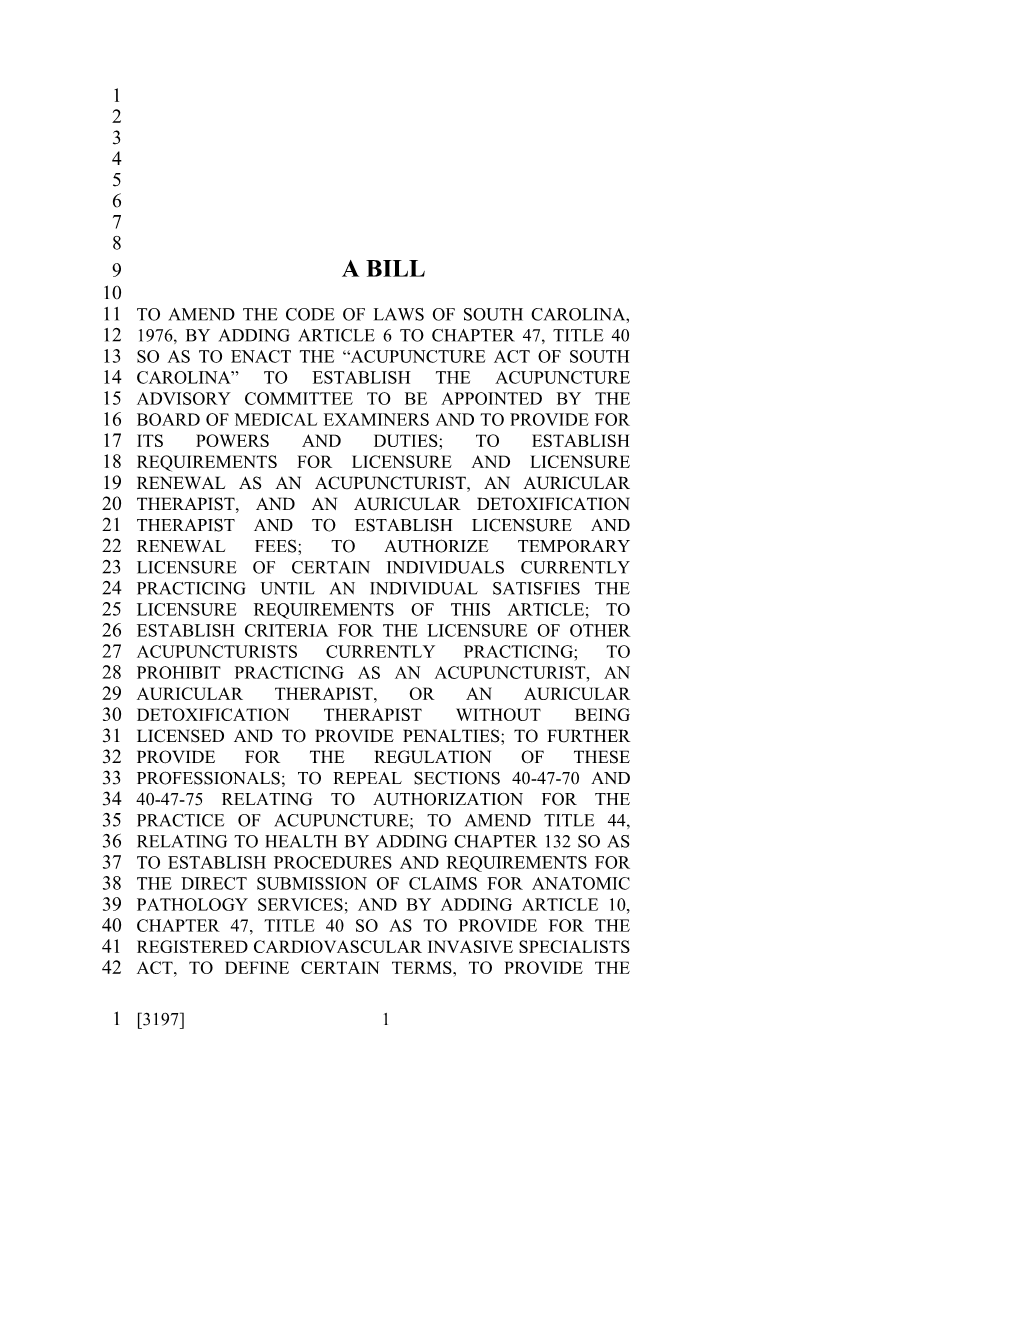 2005-2006 Bill 3197: Acupuncture Act; Registered Cardiovascular Invasive Specialist Act